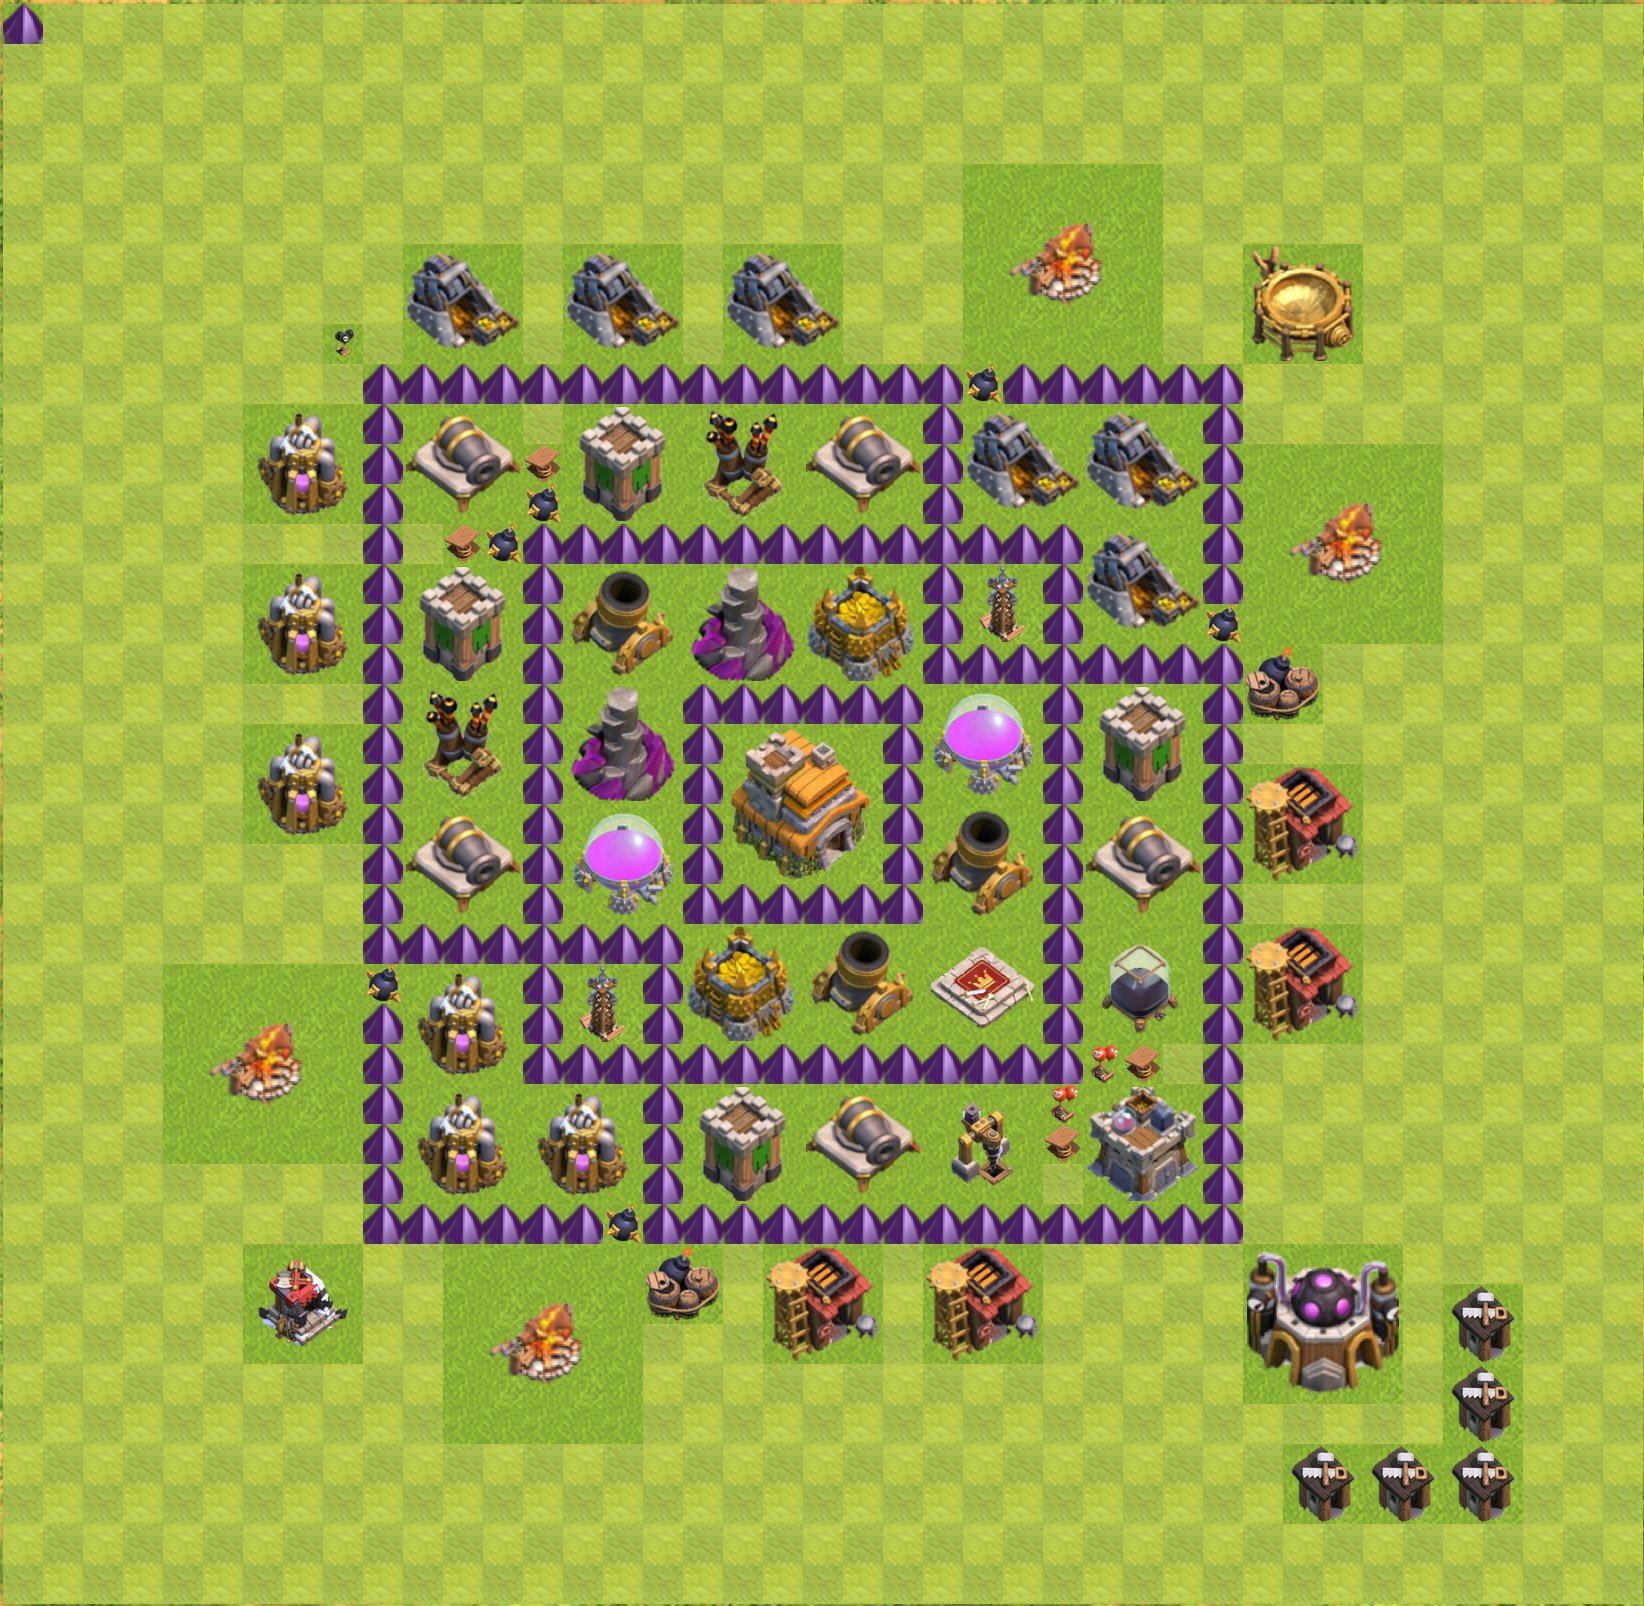 town hall level 7 layout